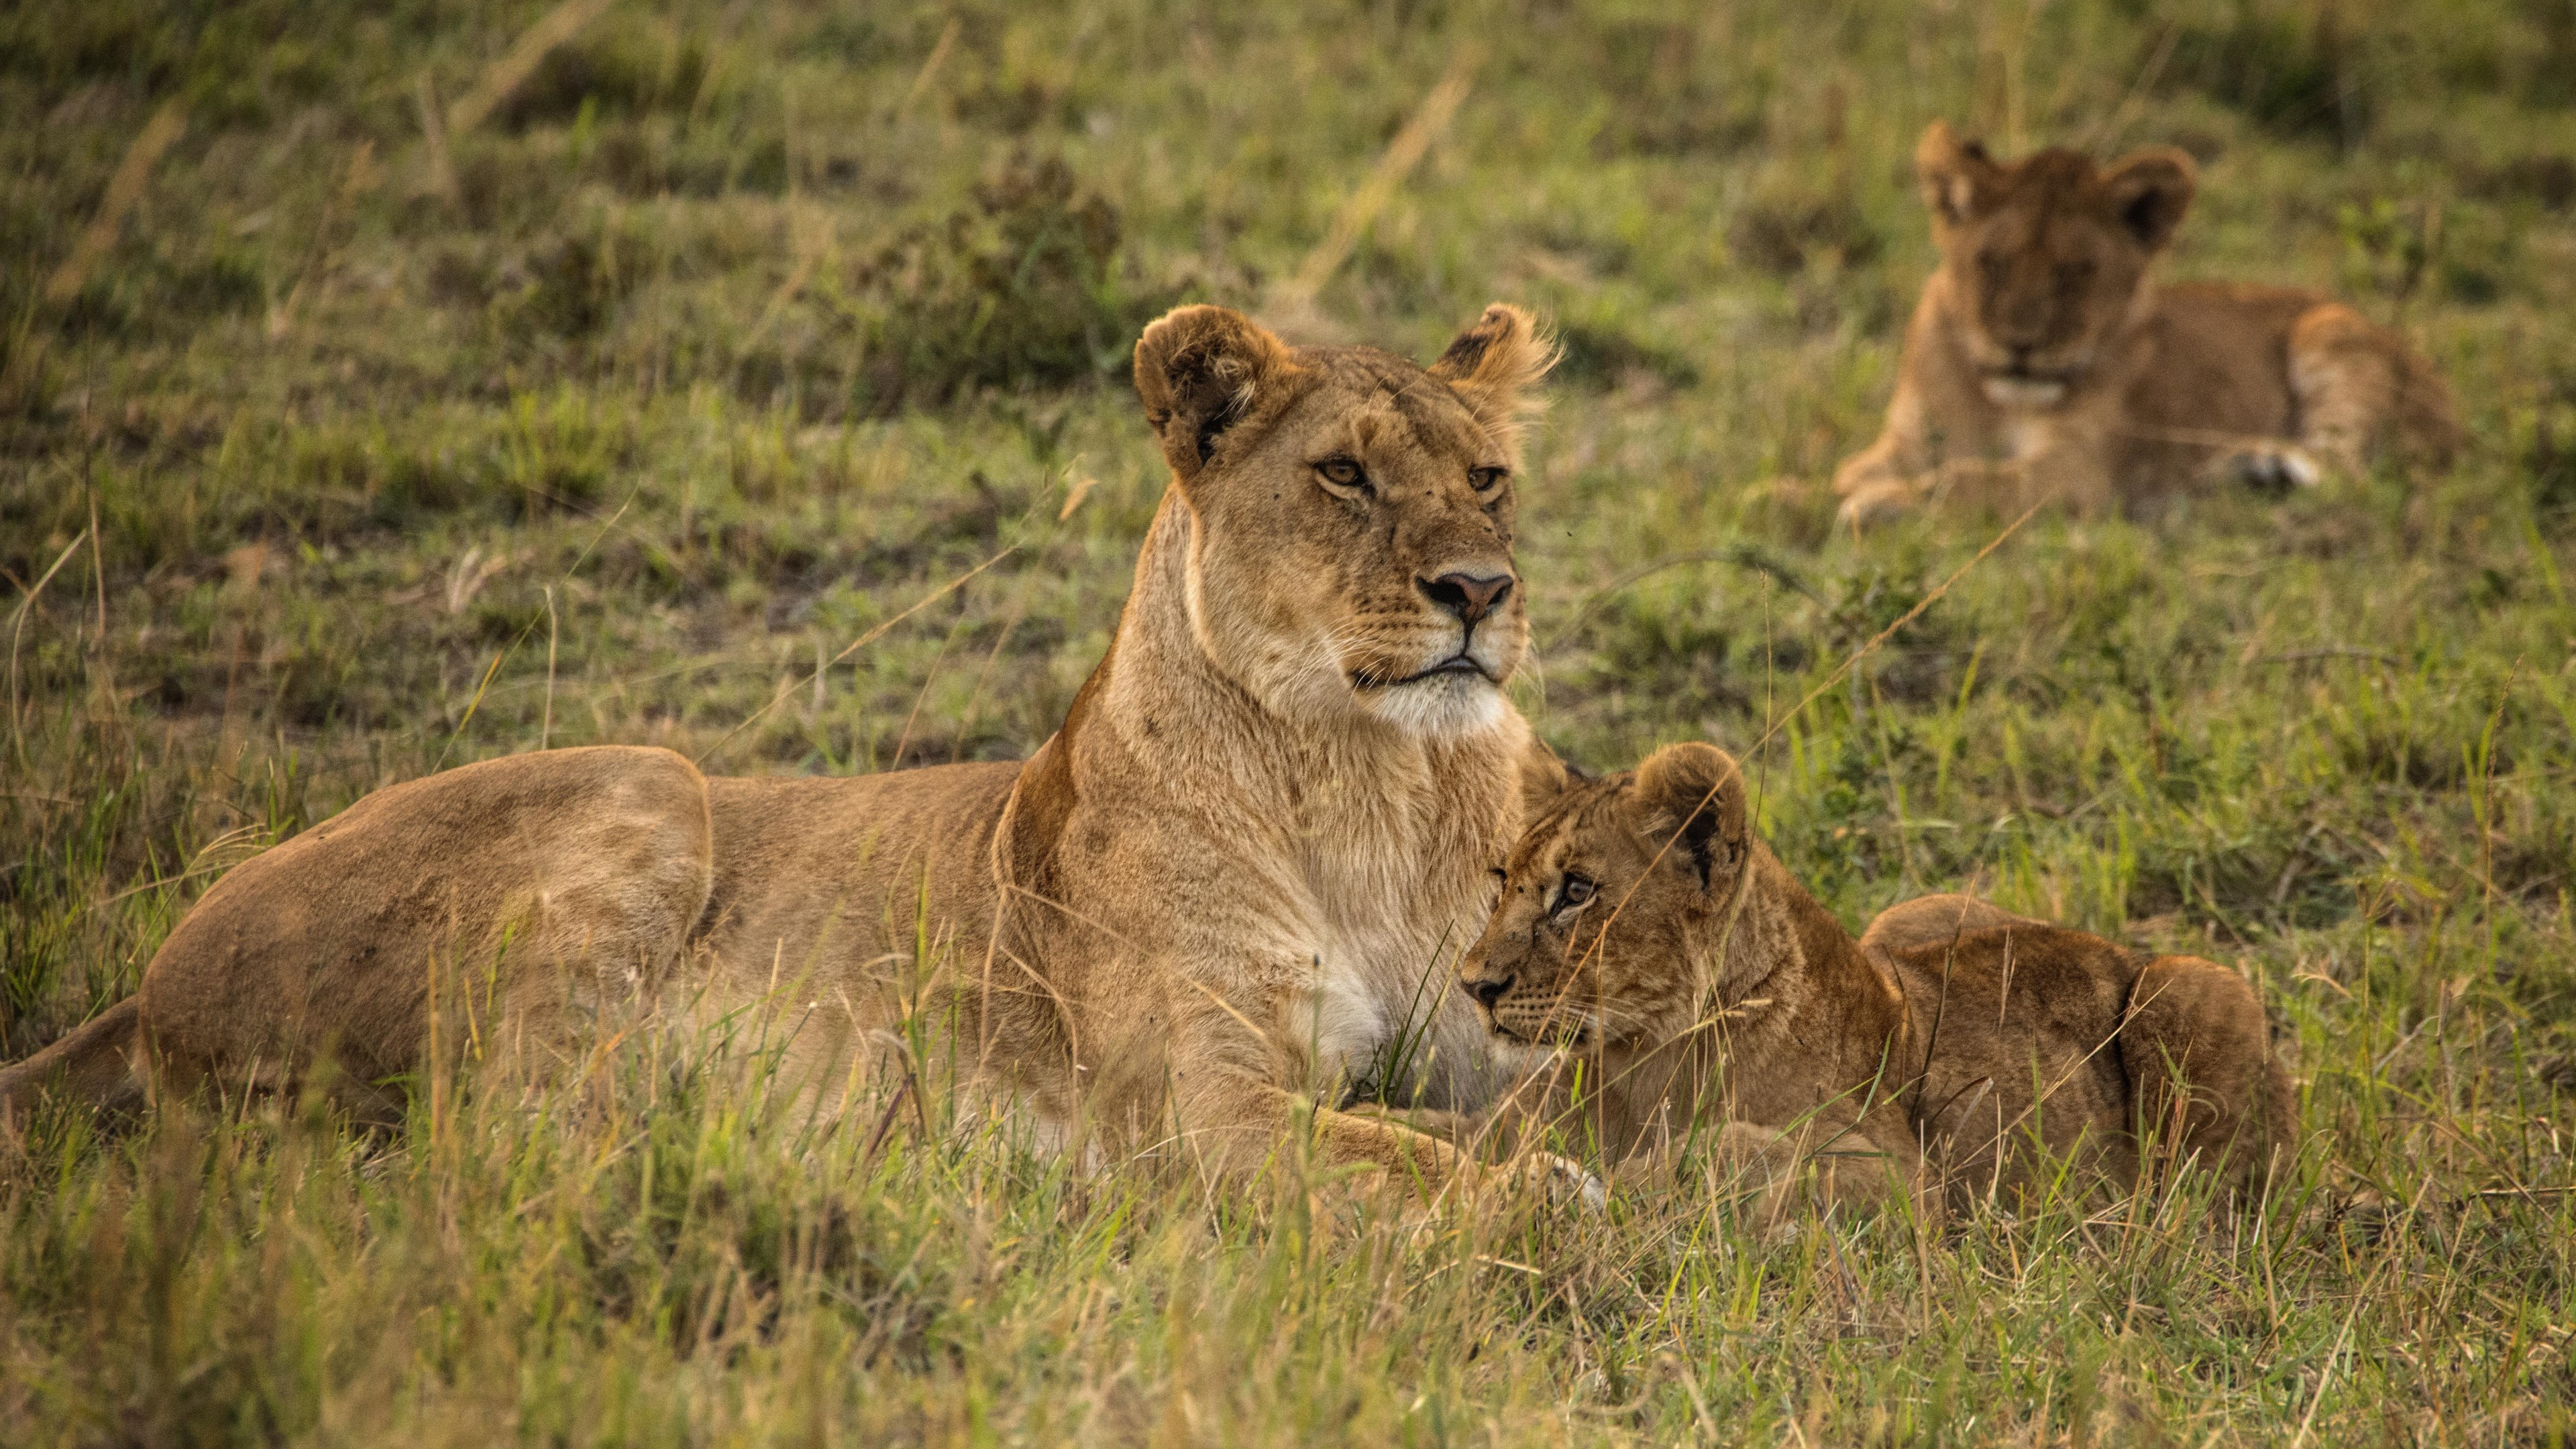 Lioness with cubs from Serengeti wallpaper 3840x2160